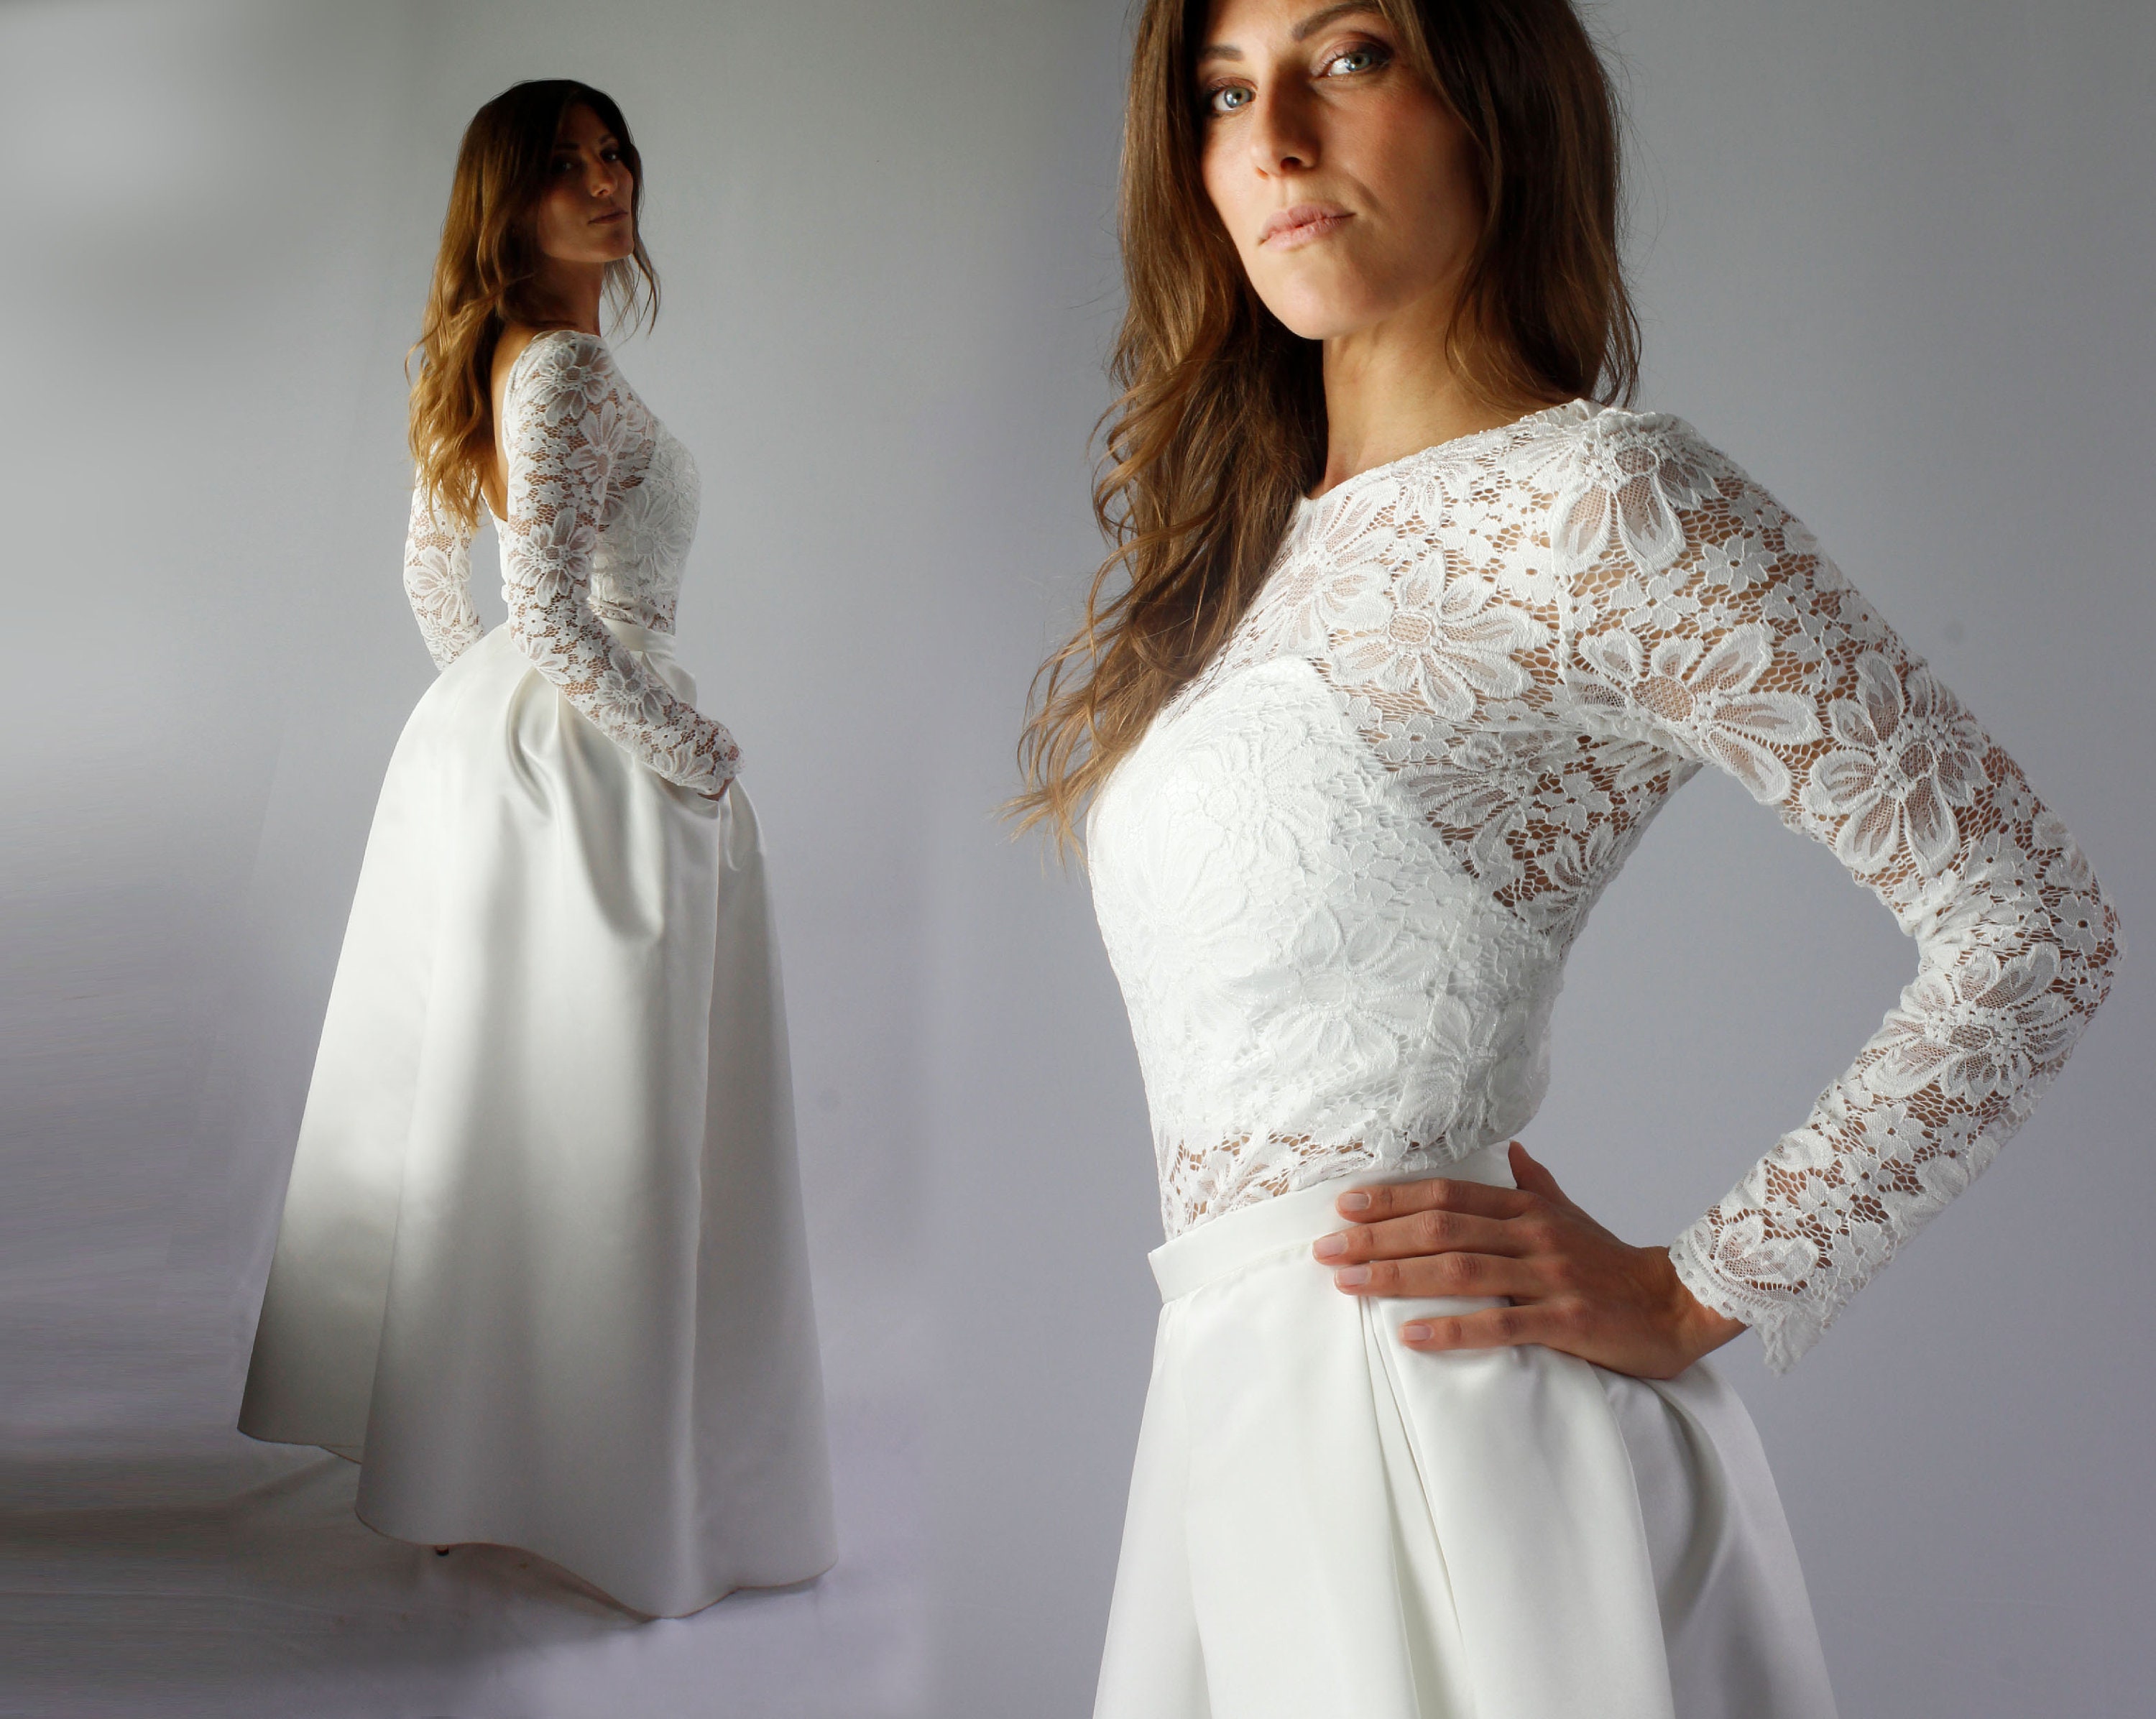 Separates wedding dress composed by a lace bodysuit with open back